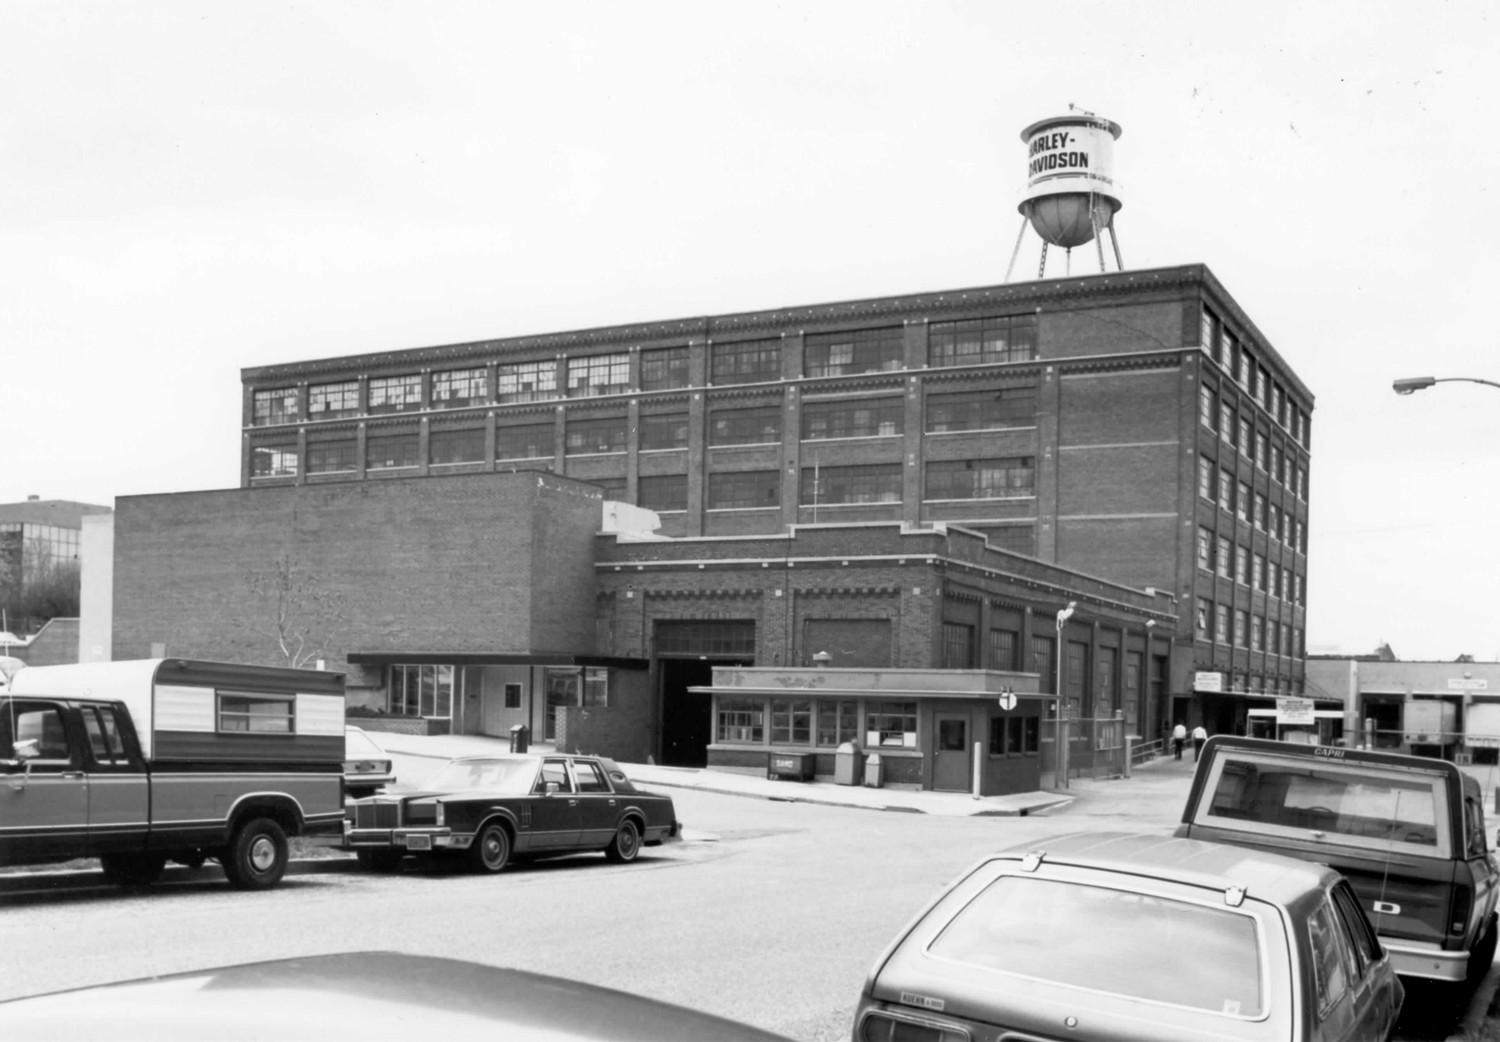 Harley Davidson Motorcycle Factory, Milwaukee Wisconsin View from northeast (1984)